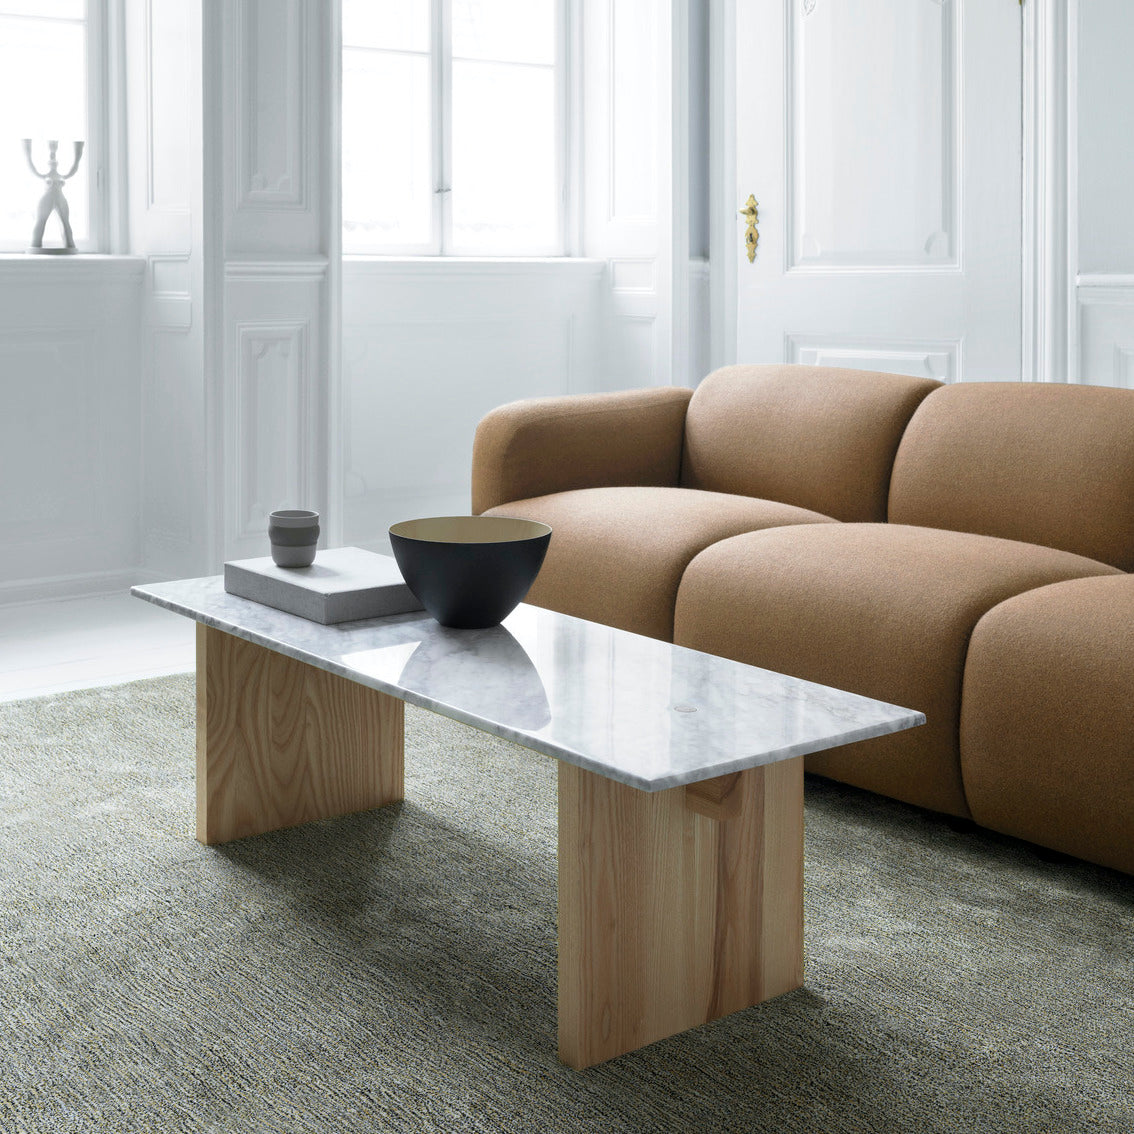 Normann Copenhagen Swell 2 Seater Sofa at someday designs. #colour_synergy-linea